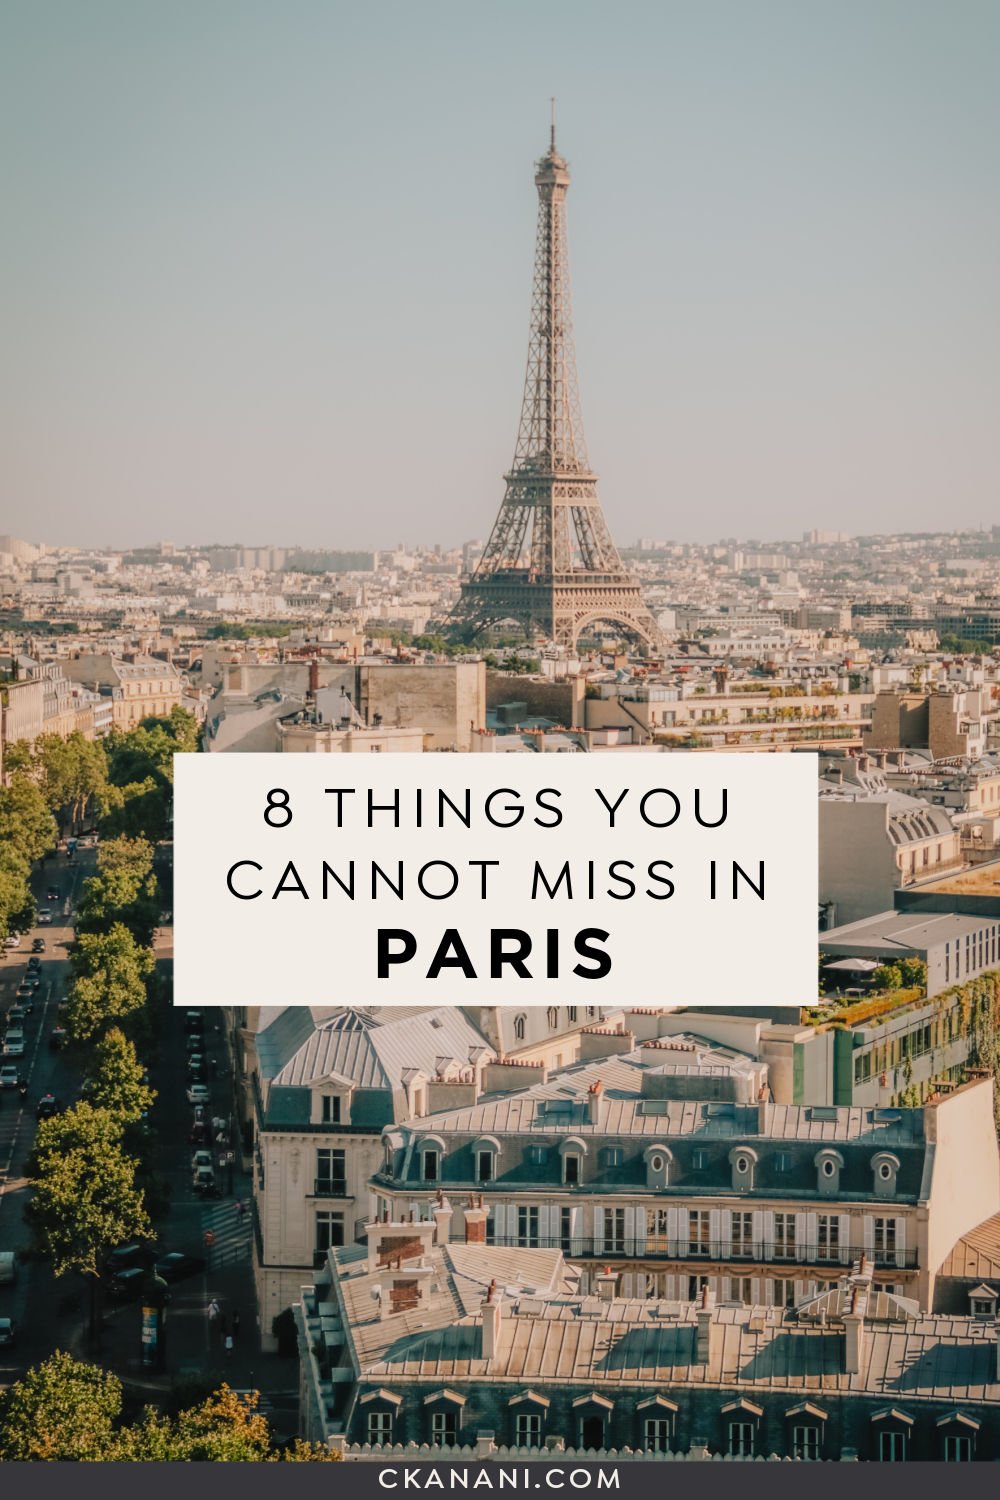 8 things you cannot miss in Paris! Paris tips / things to do in Paris / Paris holiday / Paris itinerary / Paris tips &amp; tricks / Paris France / 2 day Paris itinerary / what to do in Paris